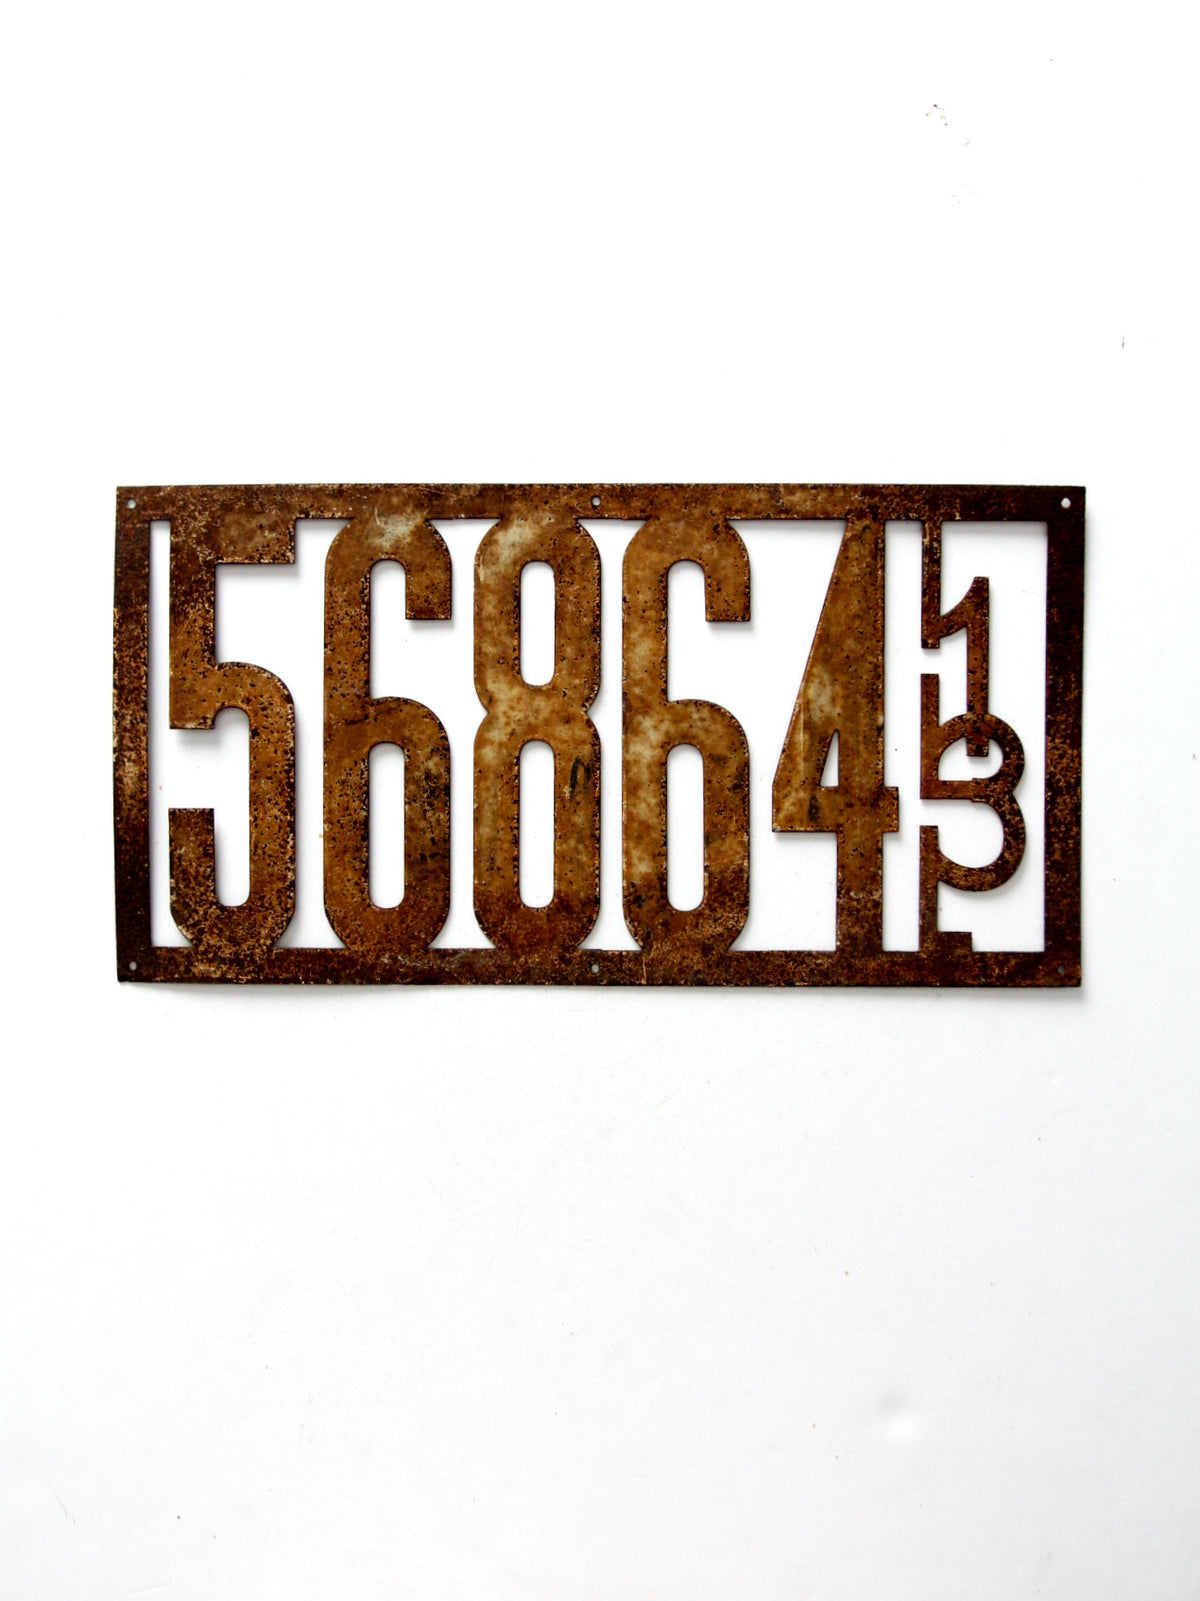 1913 Illinois state license plate